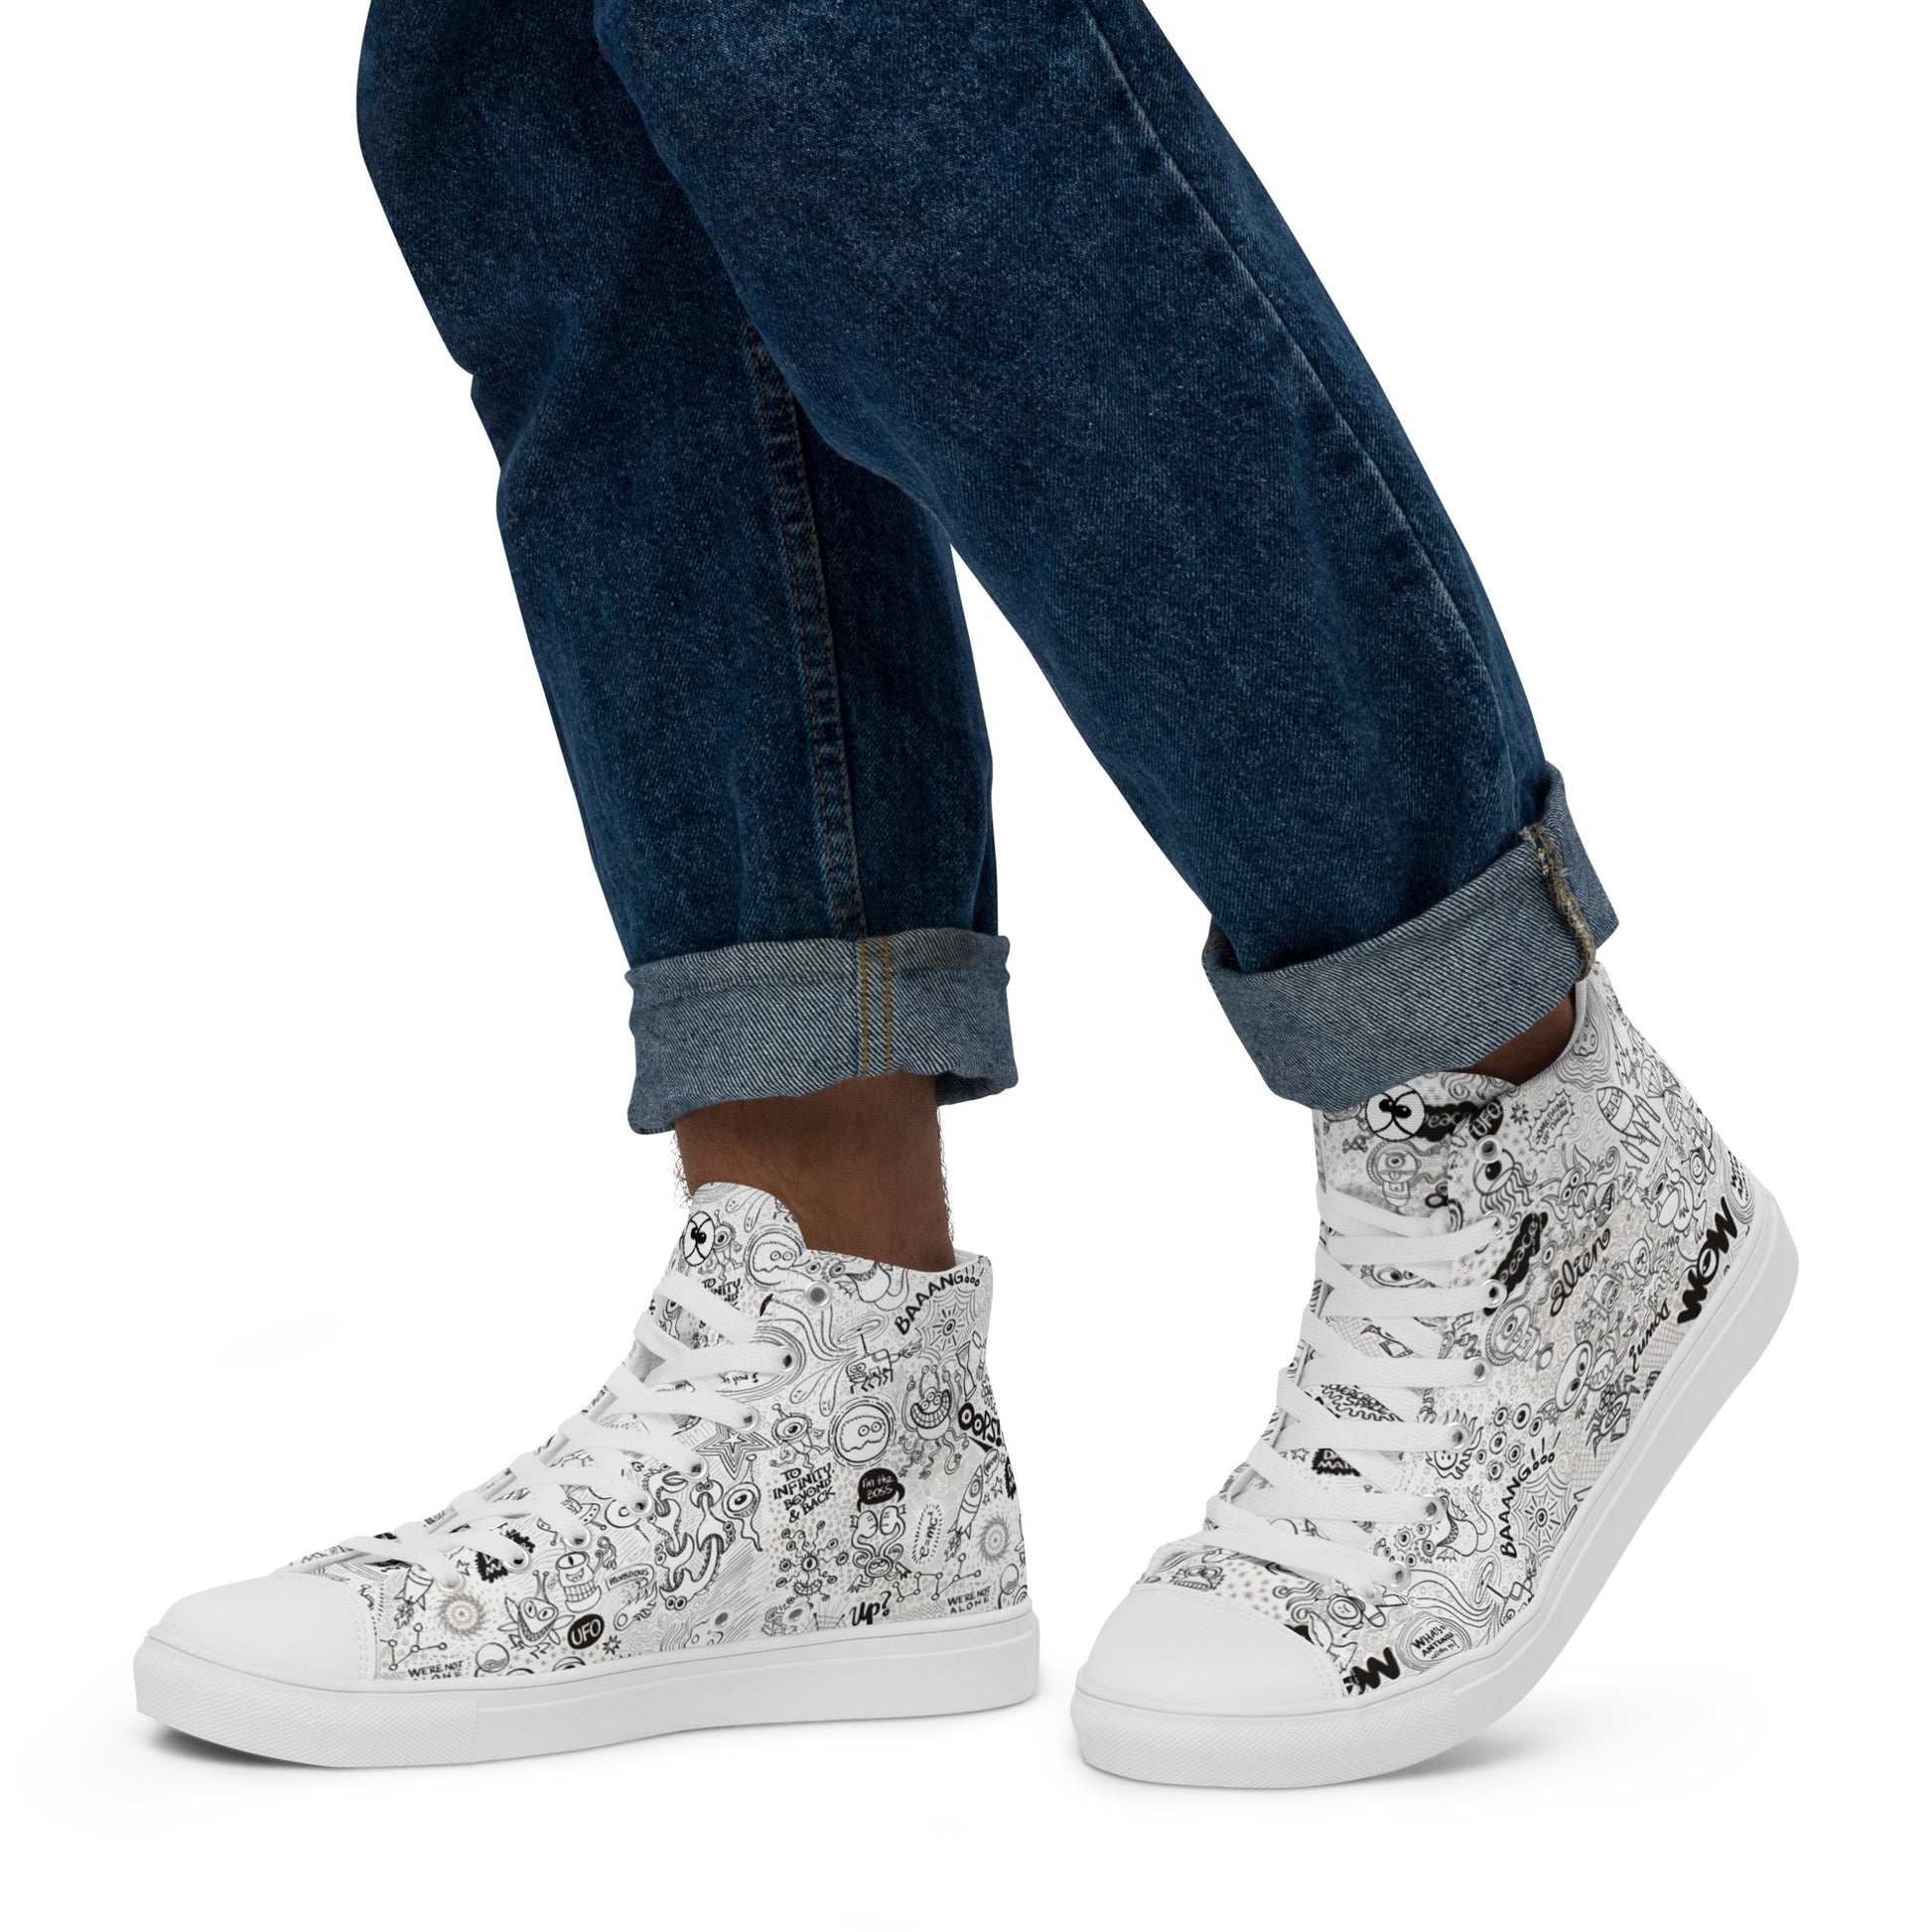 Celebrating the most comprehensive Doodle art of the universe Men’s high top canvas shoes. Lifestyle